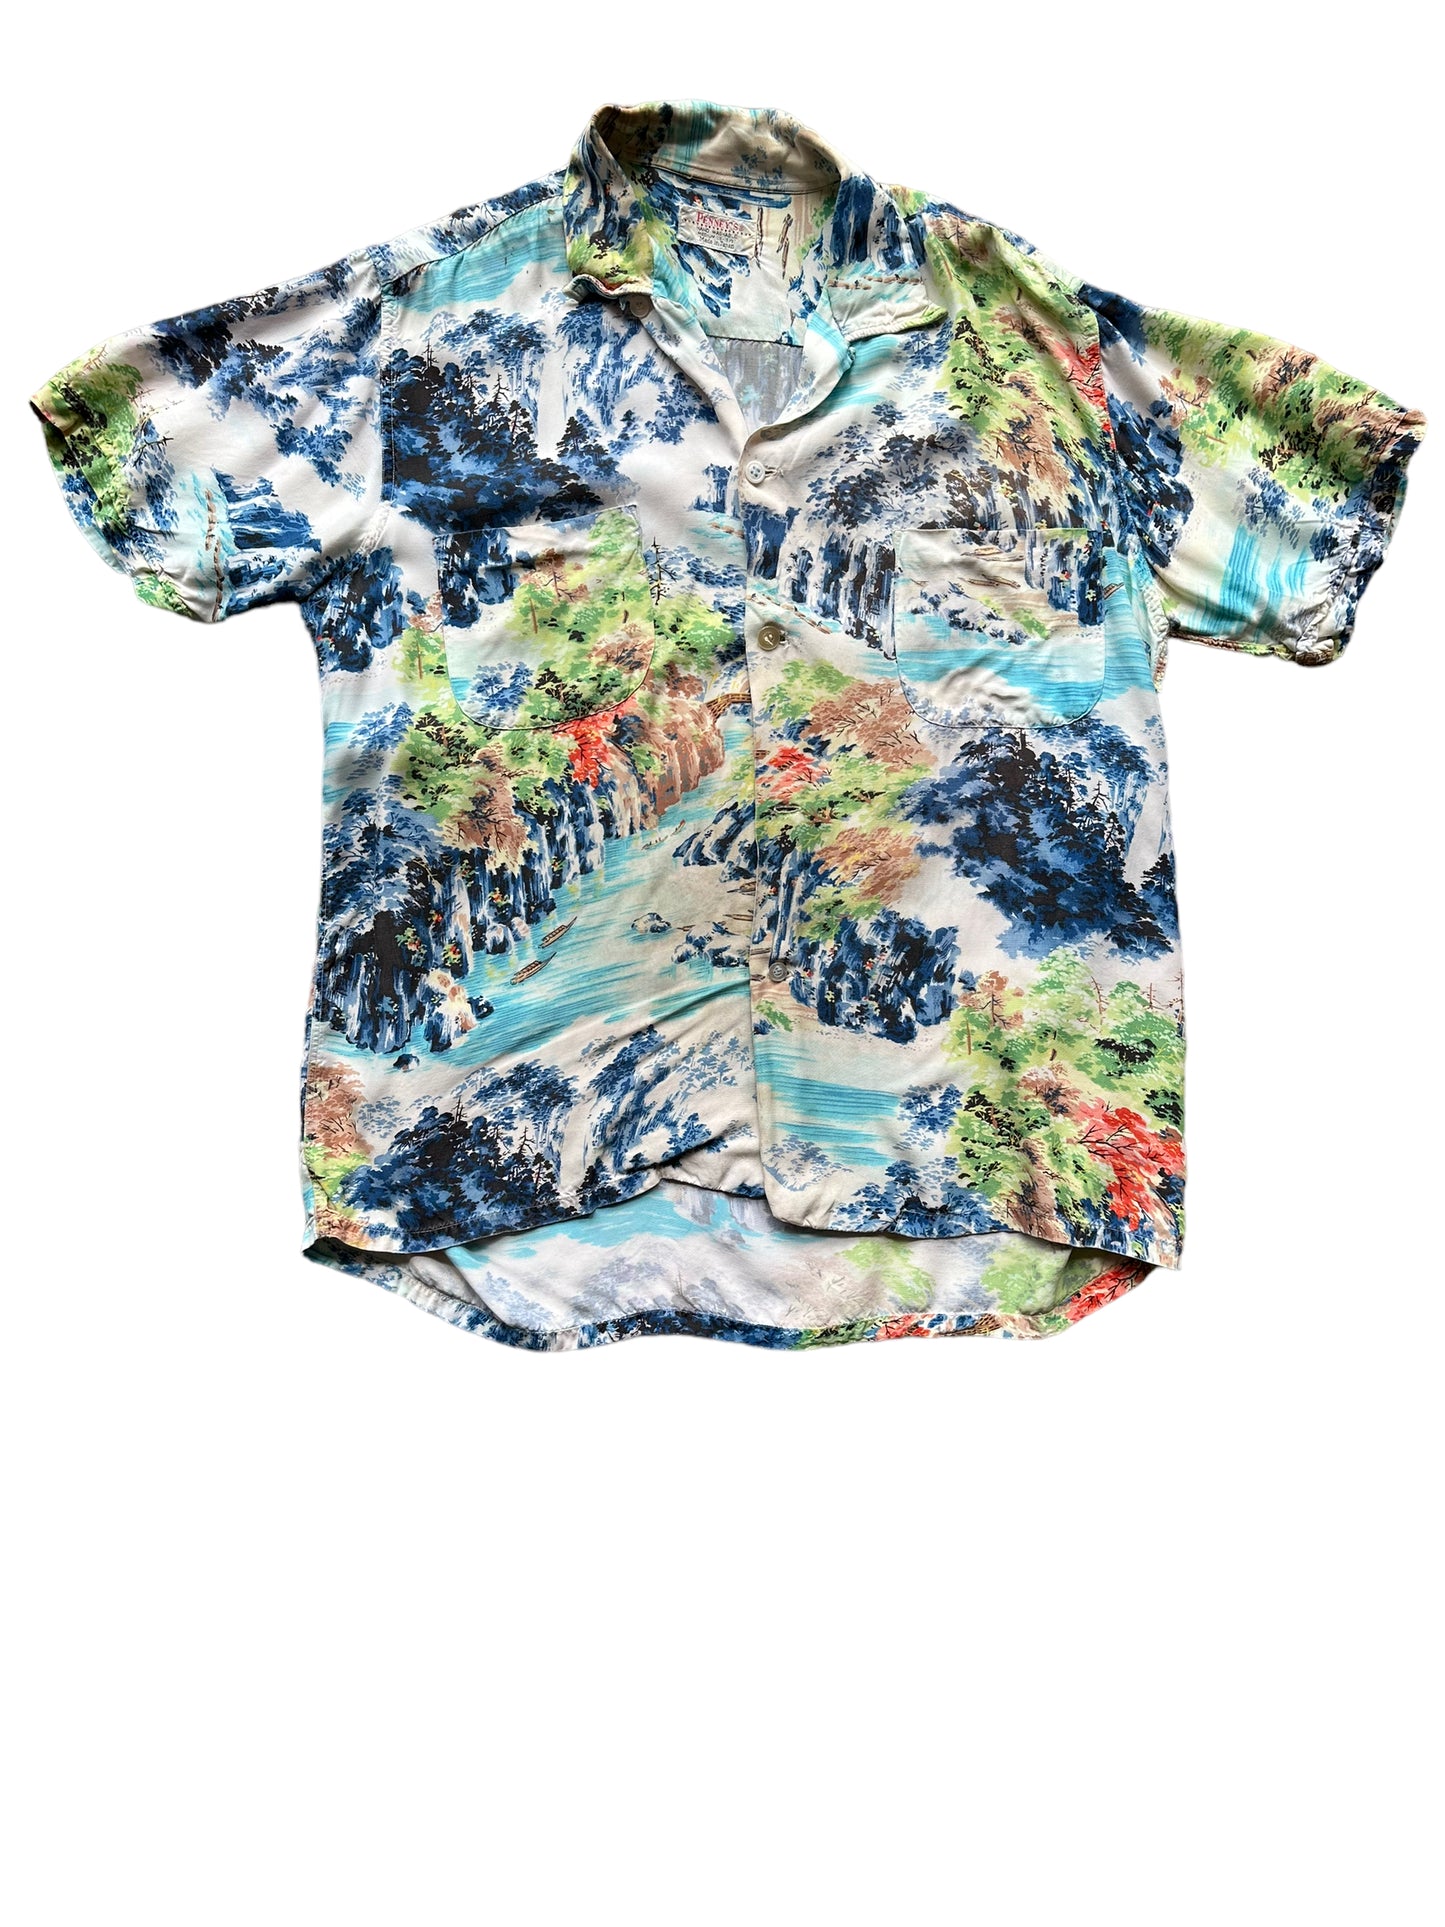 Front shot of Vintage Made in Japan Penney's Navy/Blue/Green Landscape Aloha Shirt SZ M | Seattle Vintage Rayon Hawaiian Shirt | Barn Owl Vintage Clothing Seattle